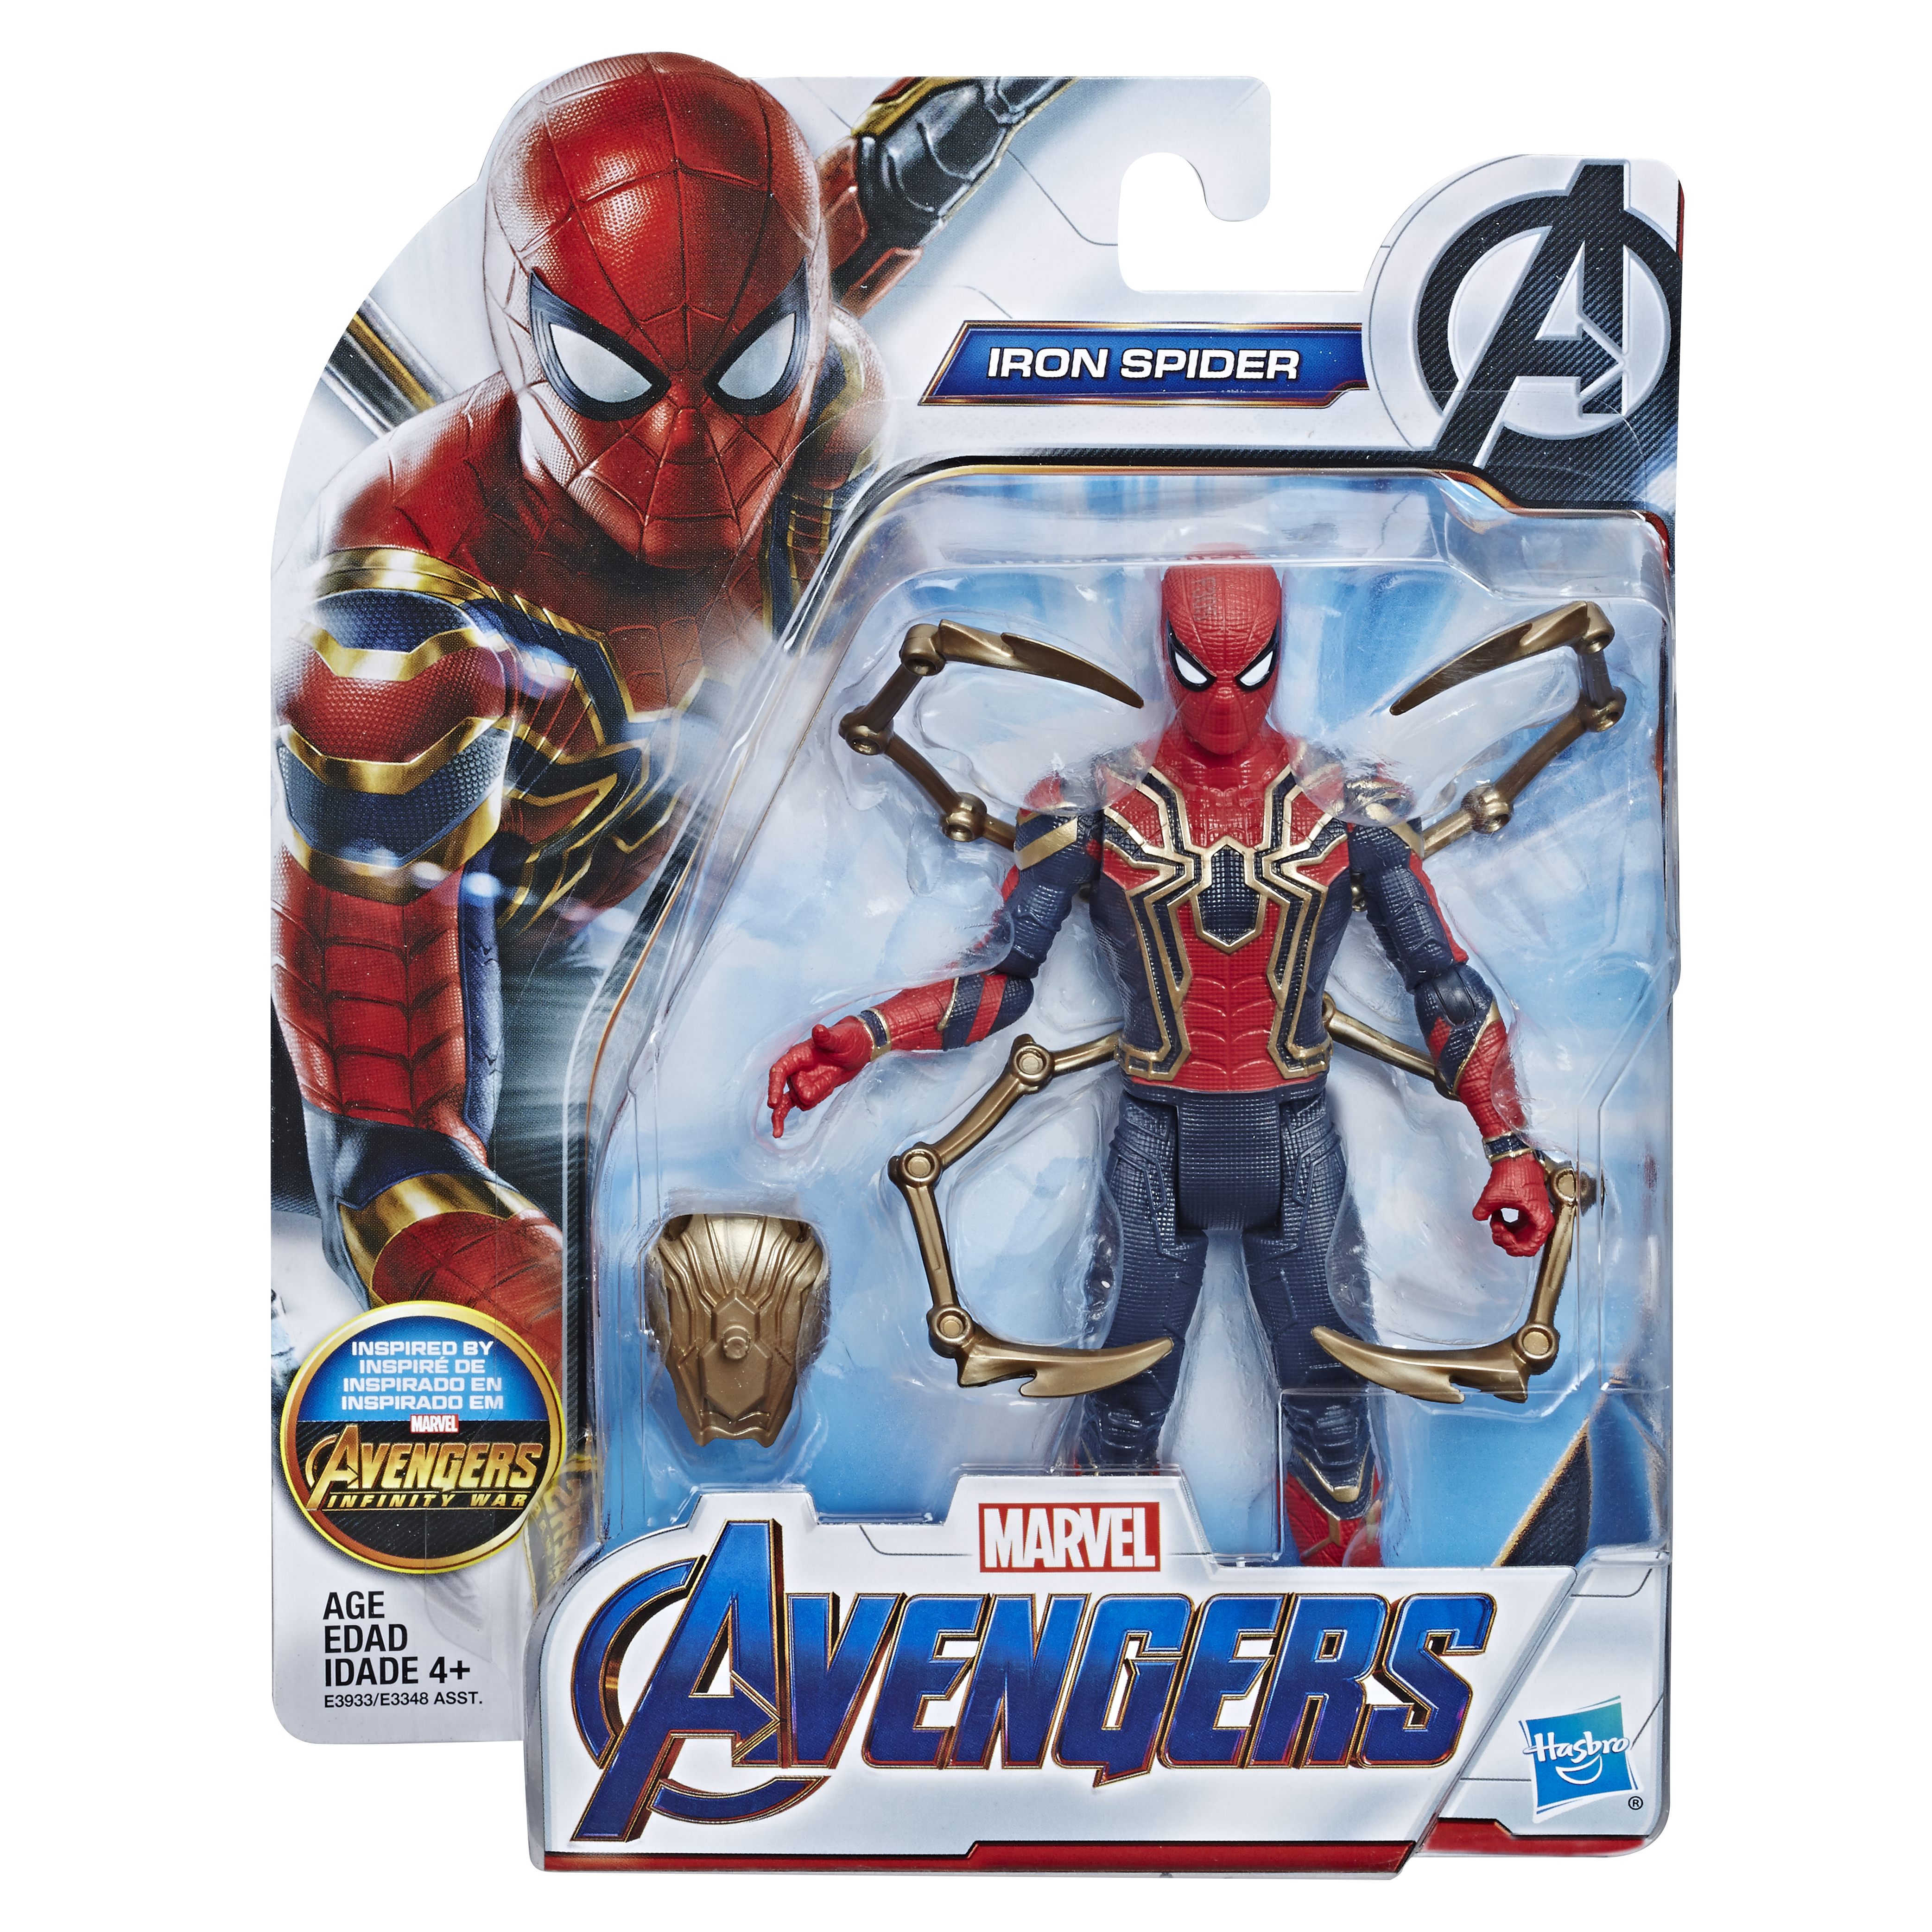 6-inch Iron Spider carded